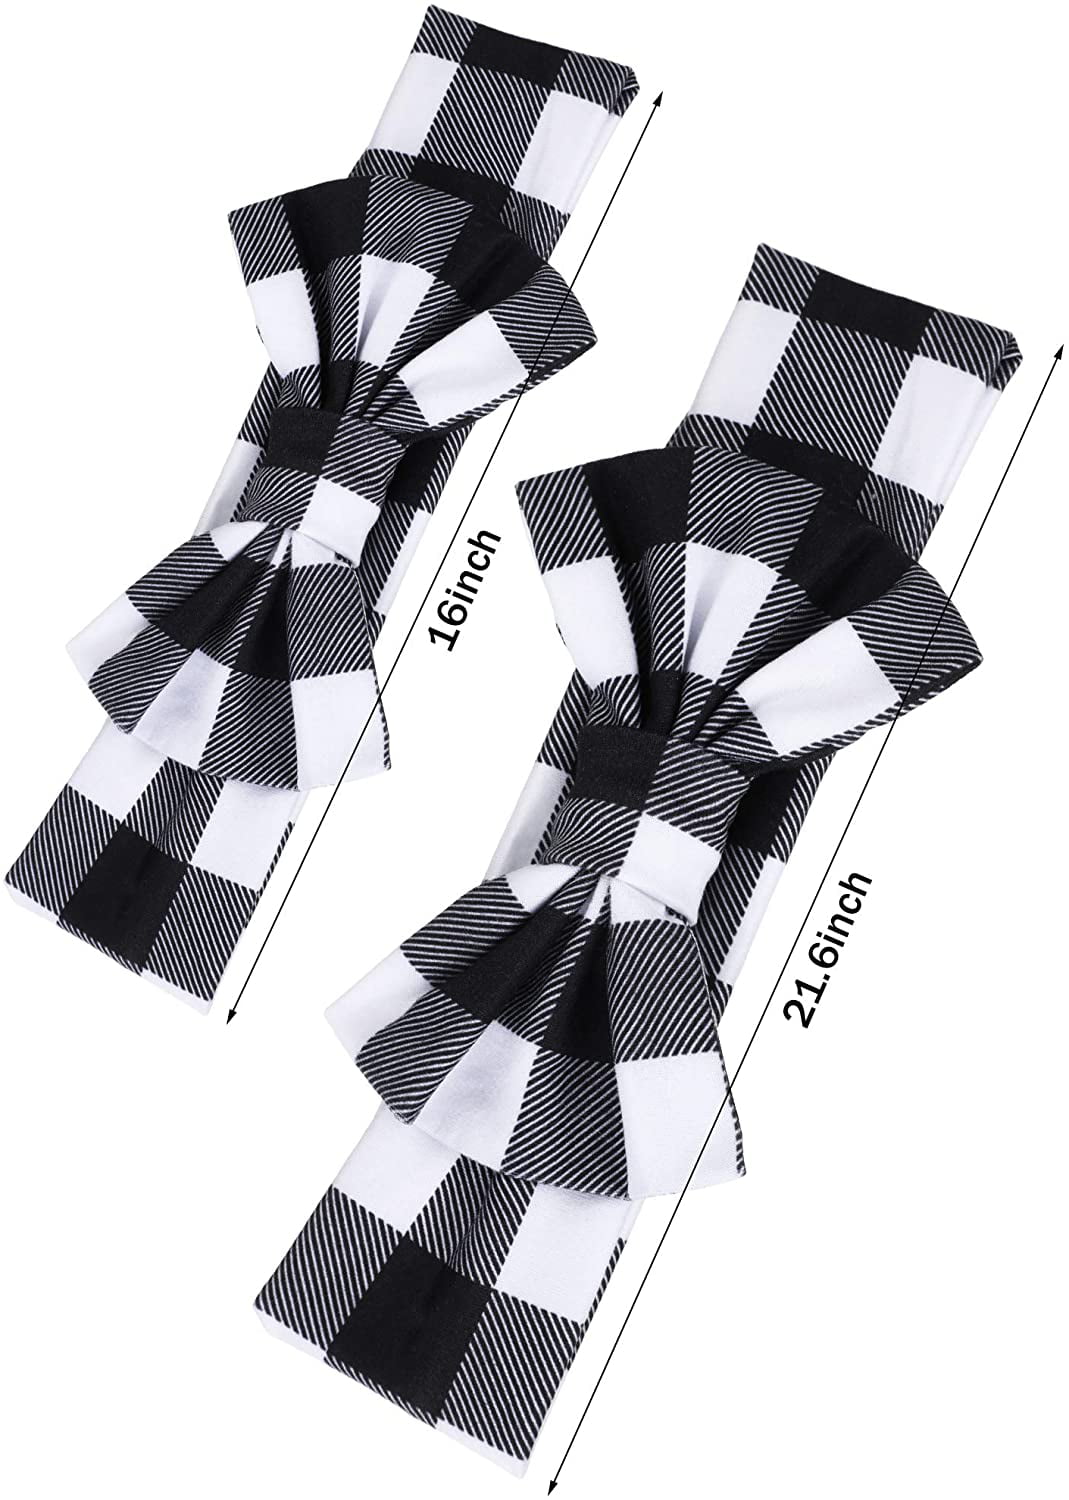 2 Pieces Plaid Headband Christmas Check Bow Headwrap Buffalo Plaid Knot Headband for Baby Girl Infant Toddler Child Women Hair Accessories 